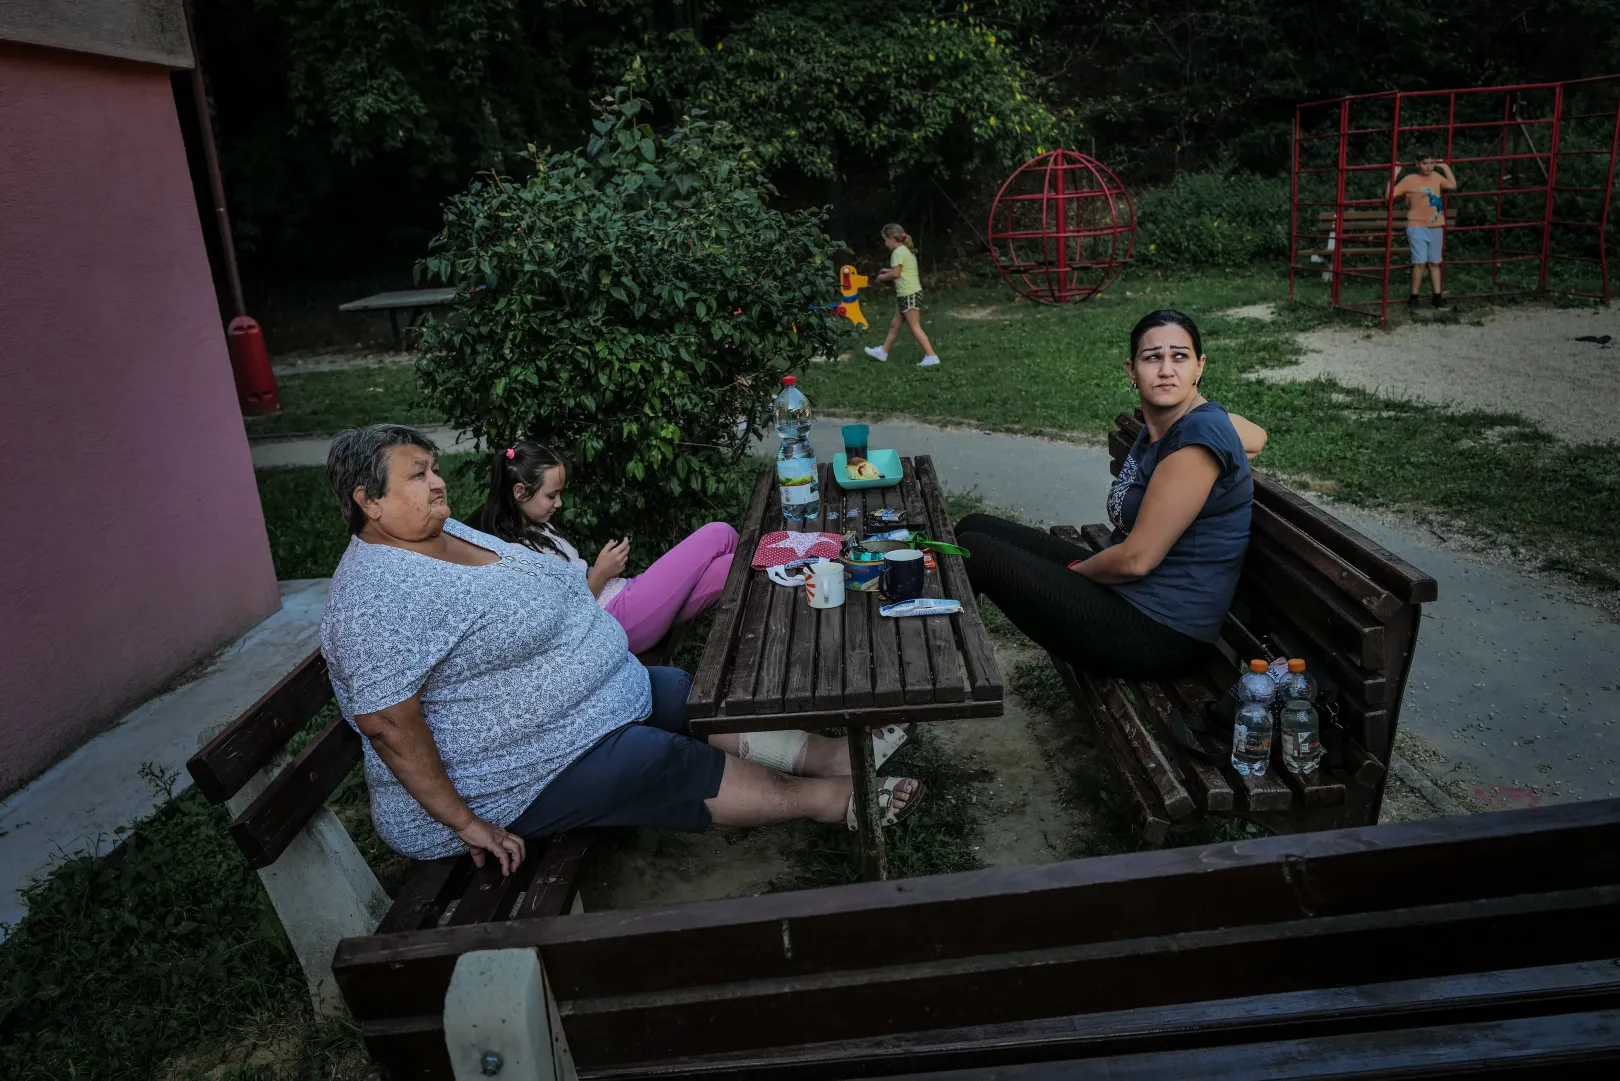 Locals in the immediate vicinity of the collection point in Vel'ky Krtiš, Slovakia – Photo: István Huszti / Telex